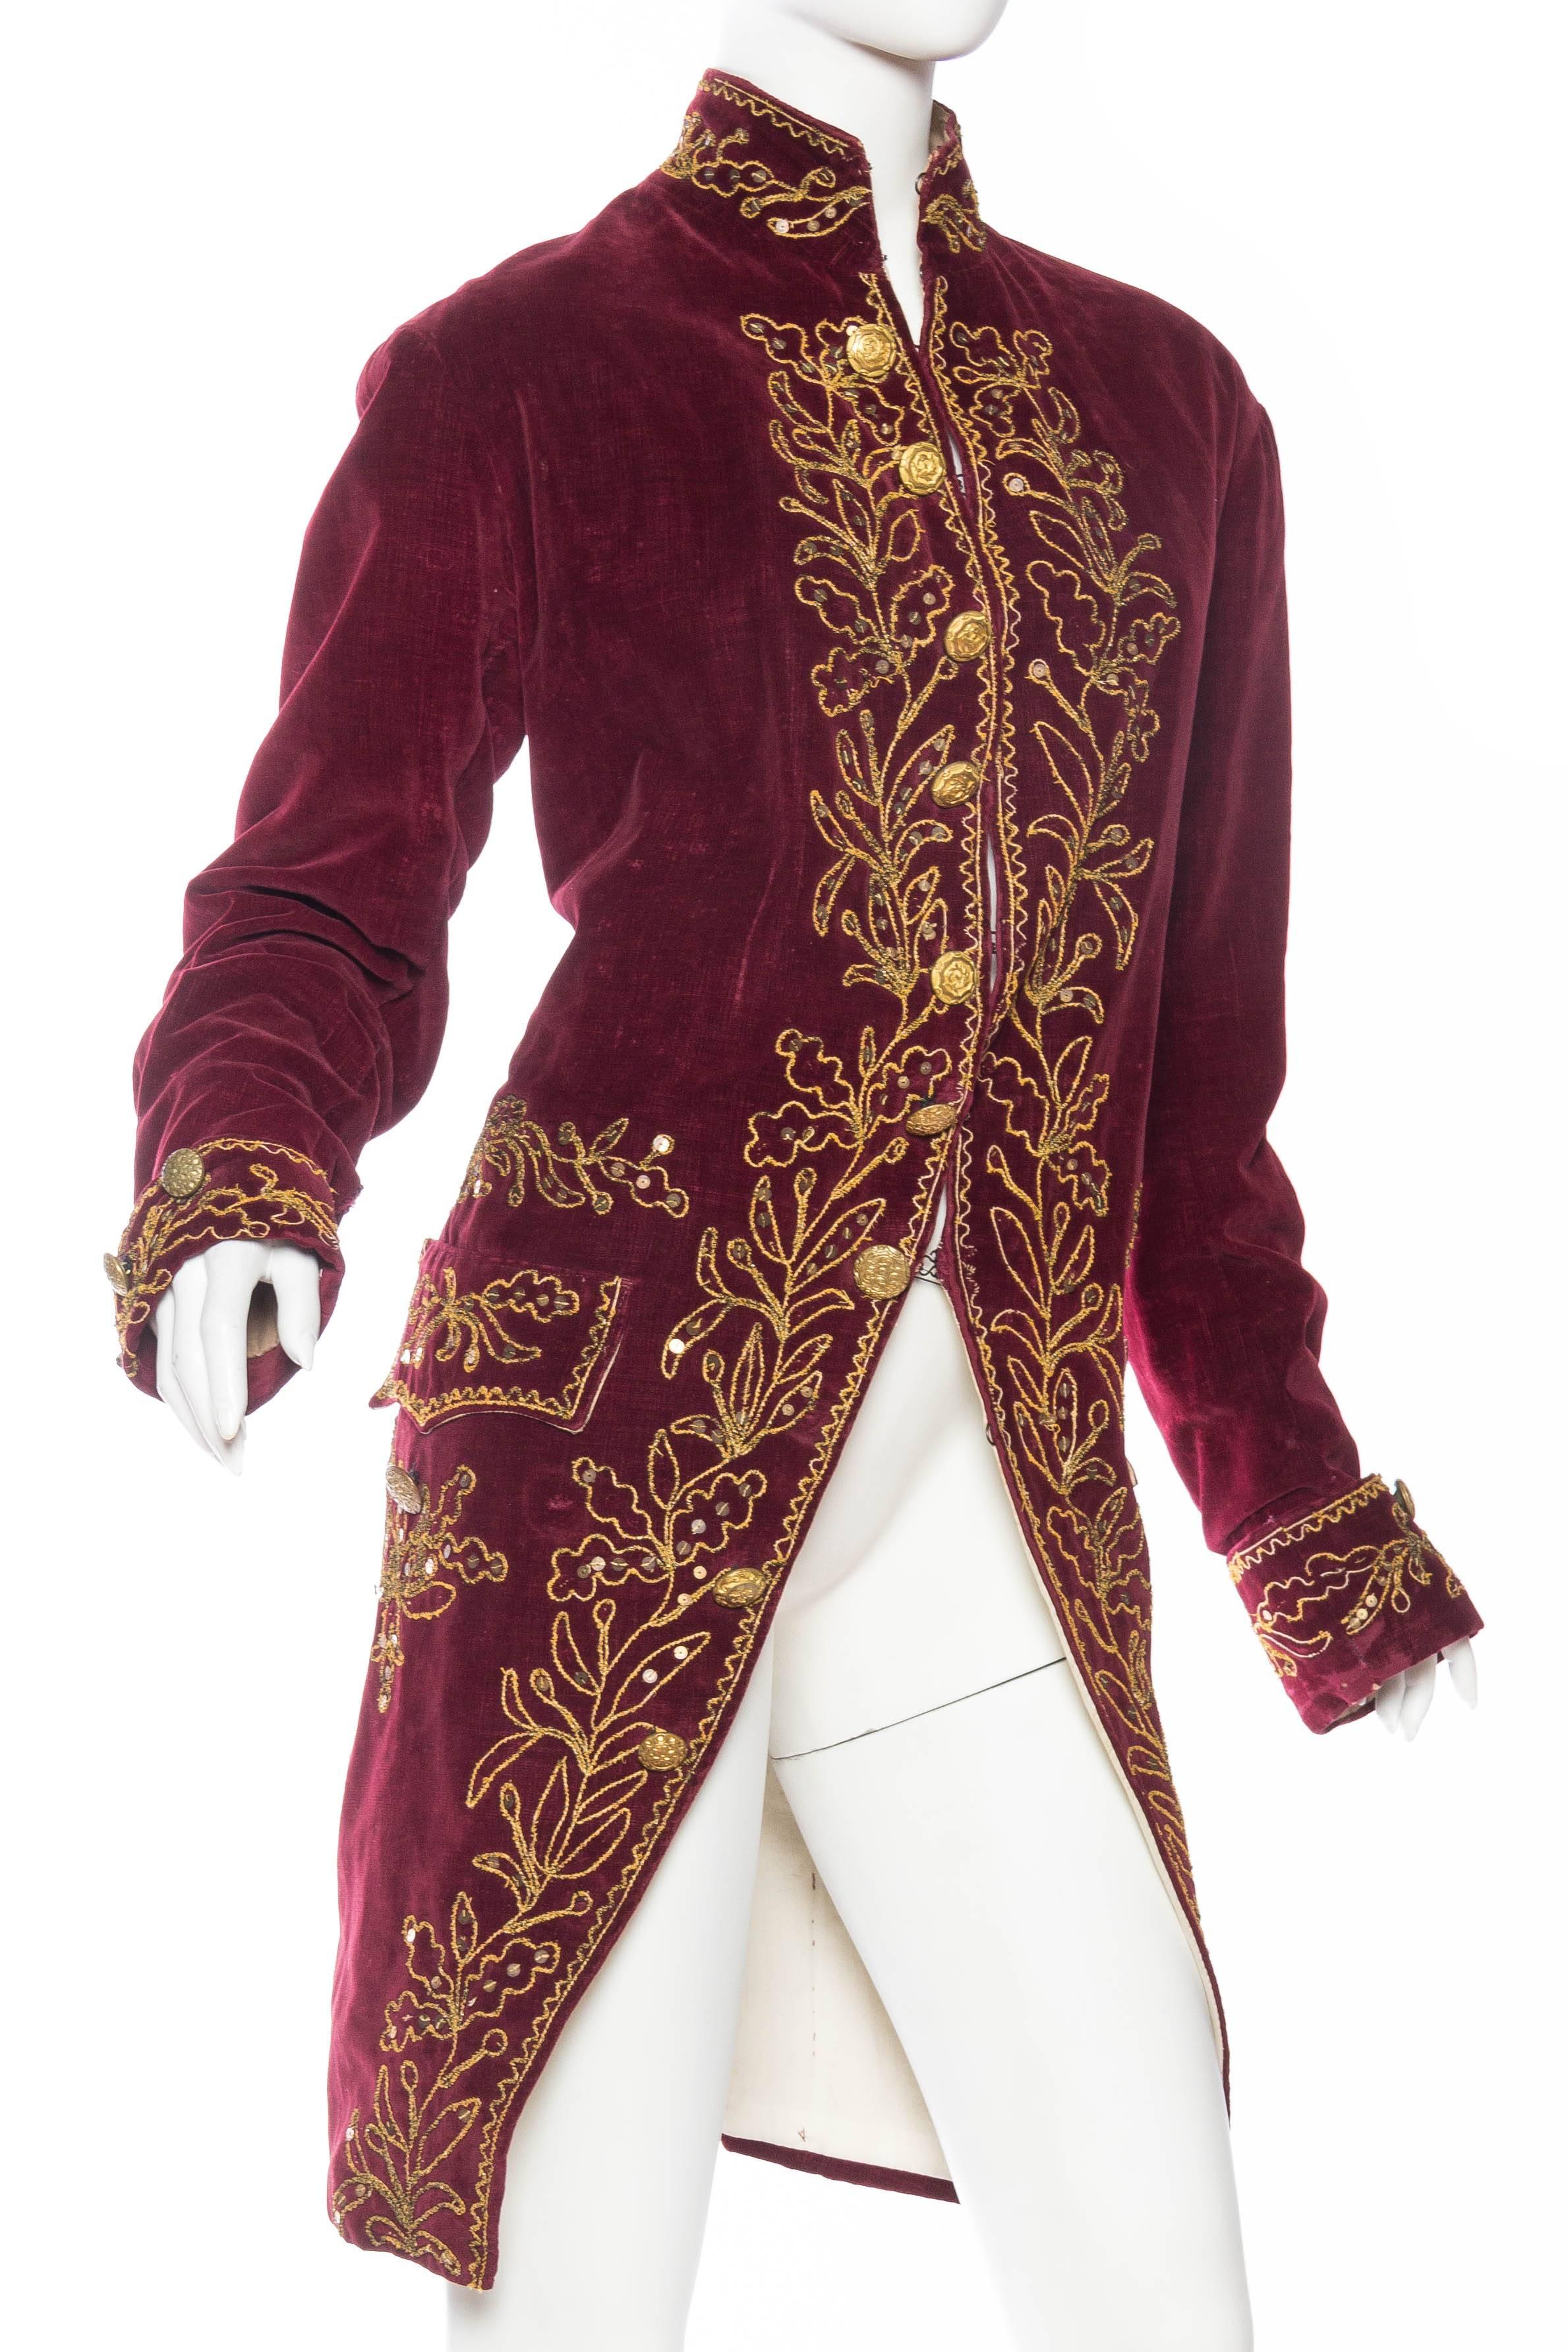 18th century frock coat for sale